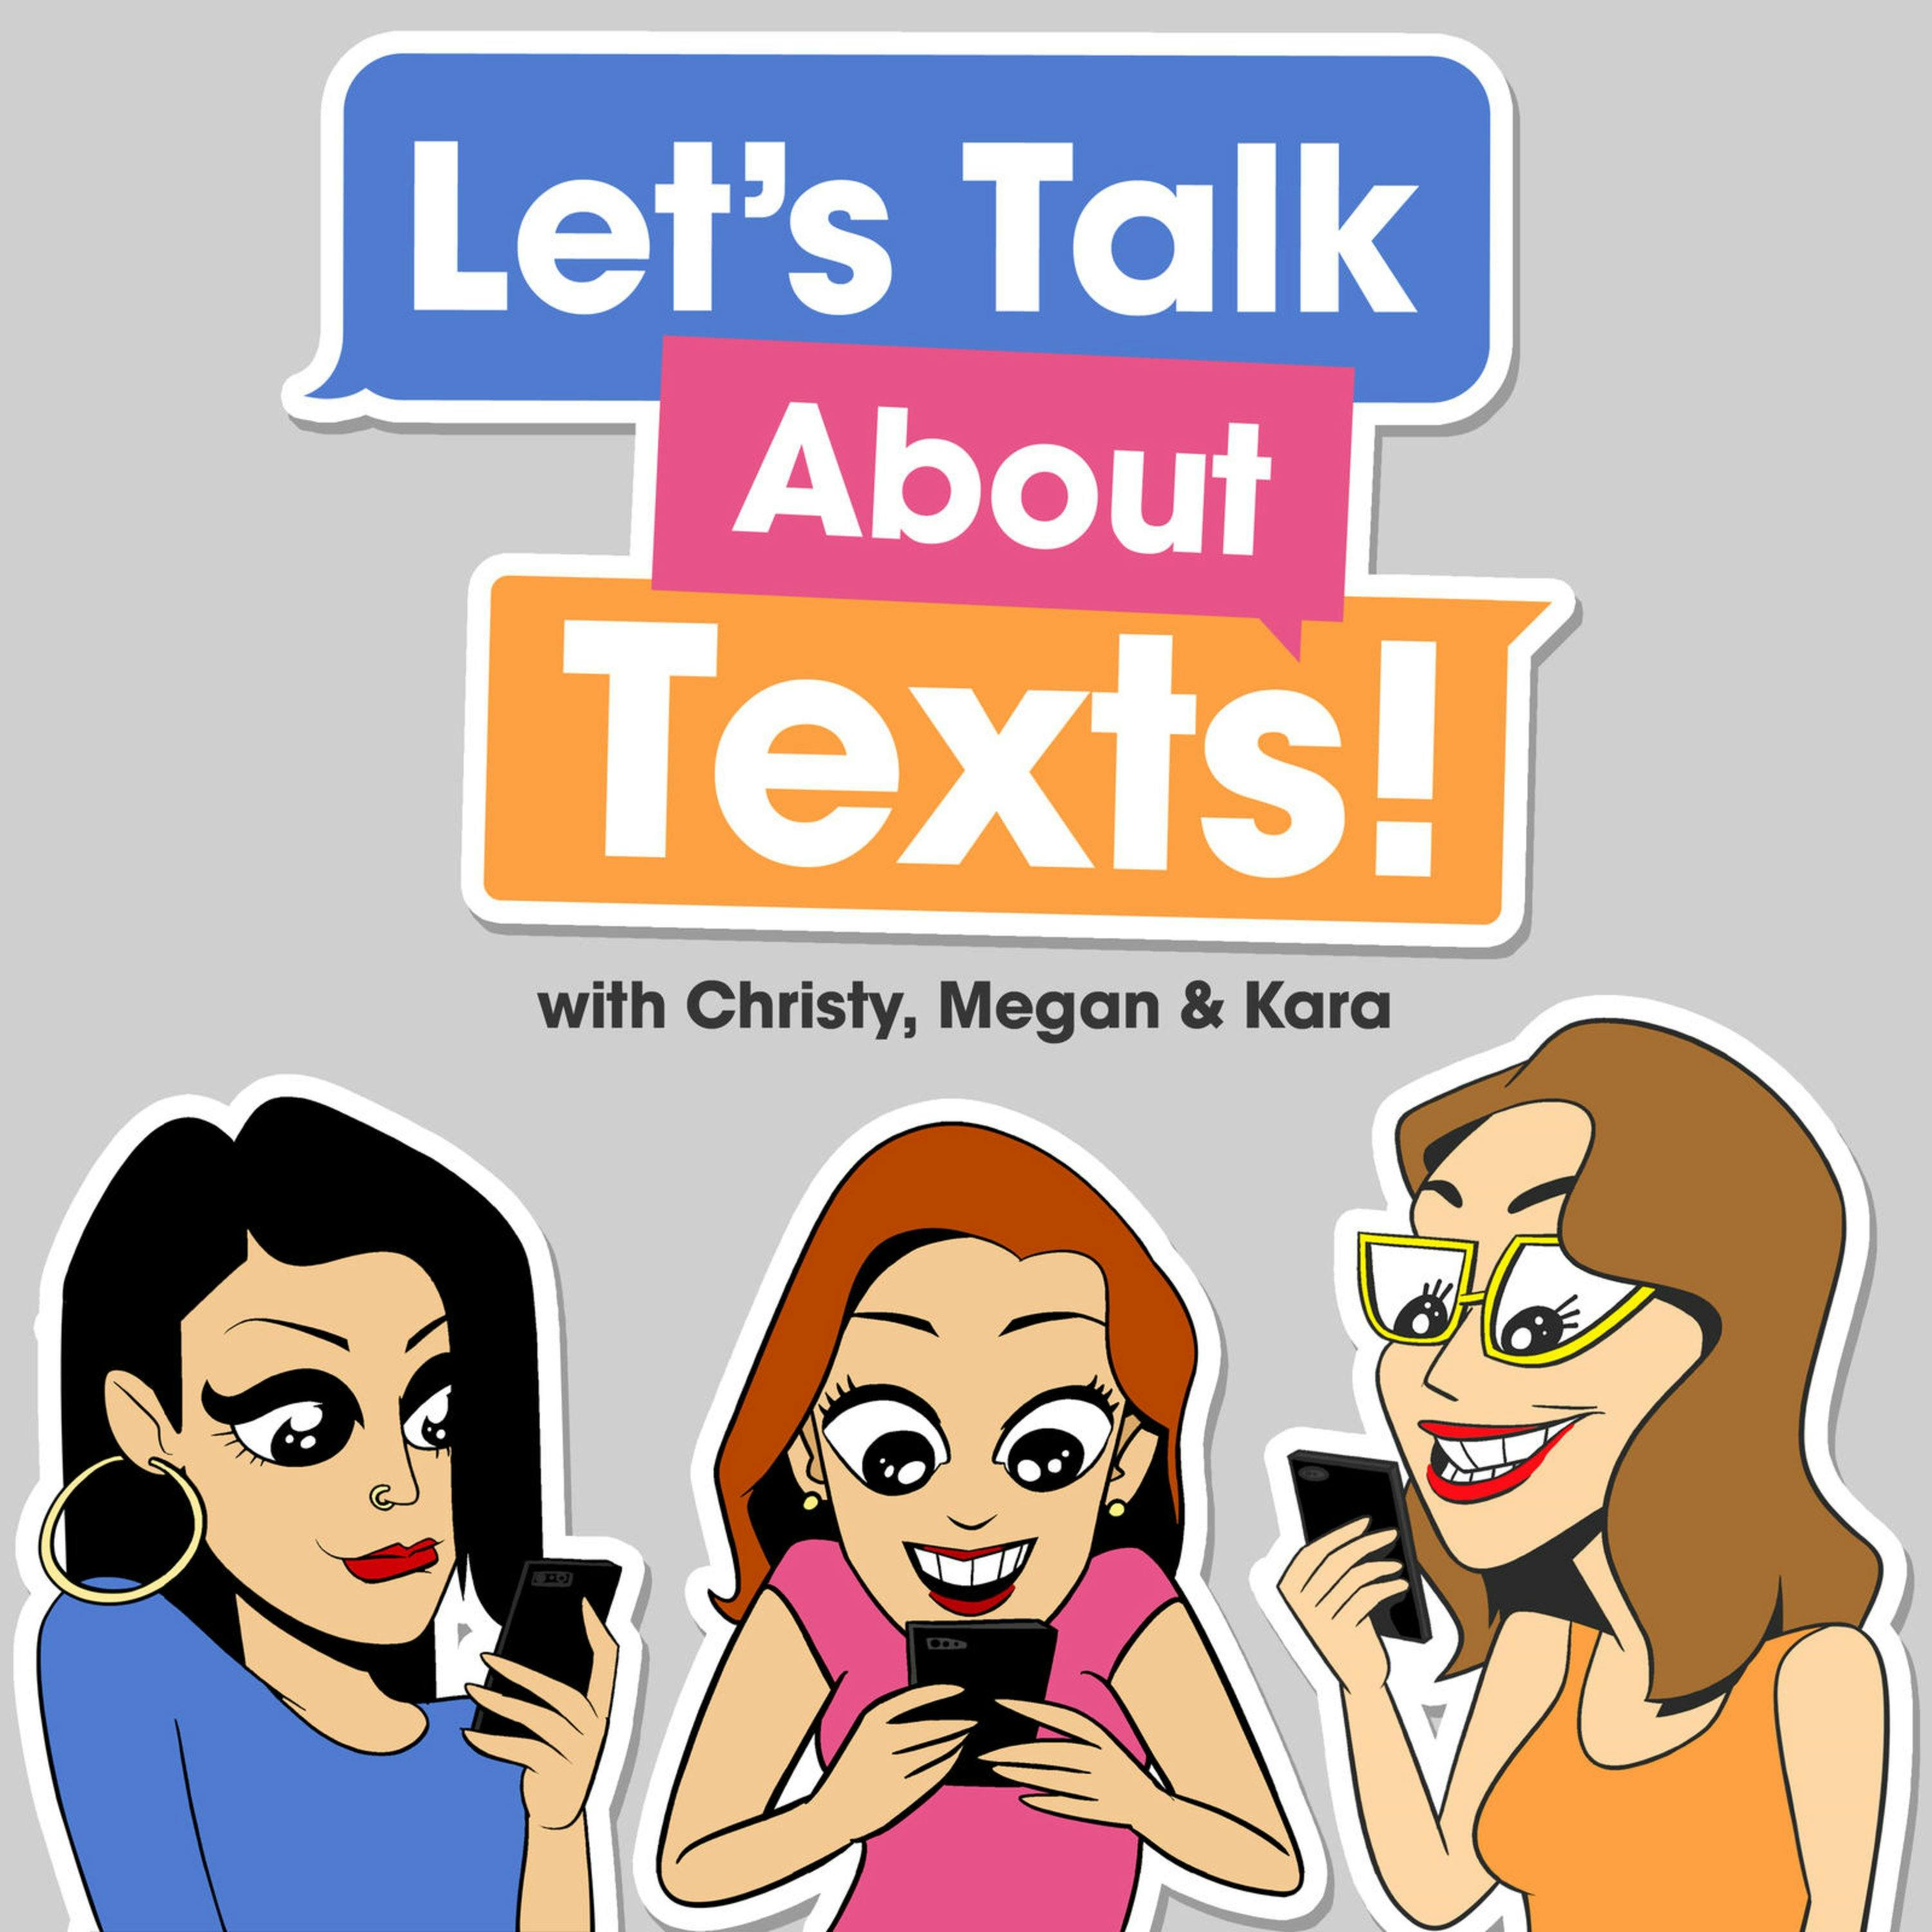 Let's Talk About Texts!